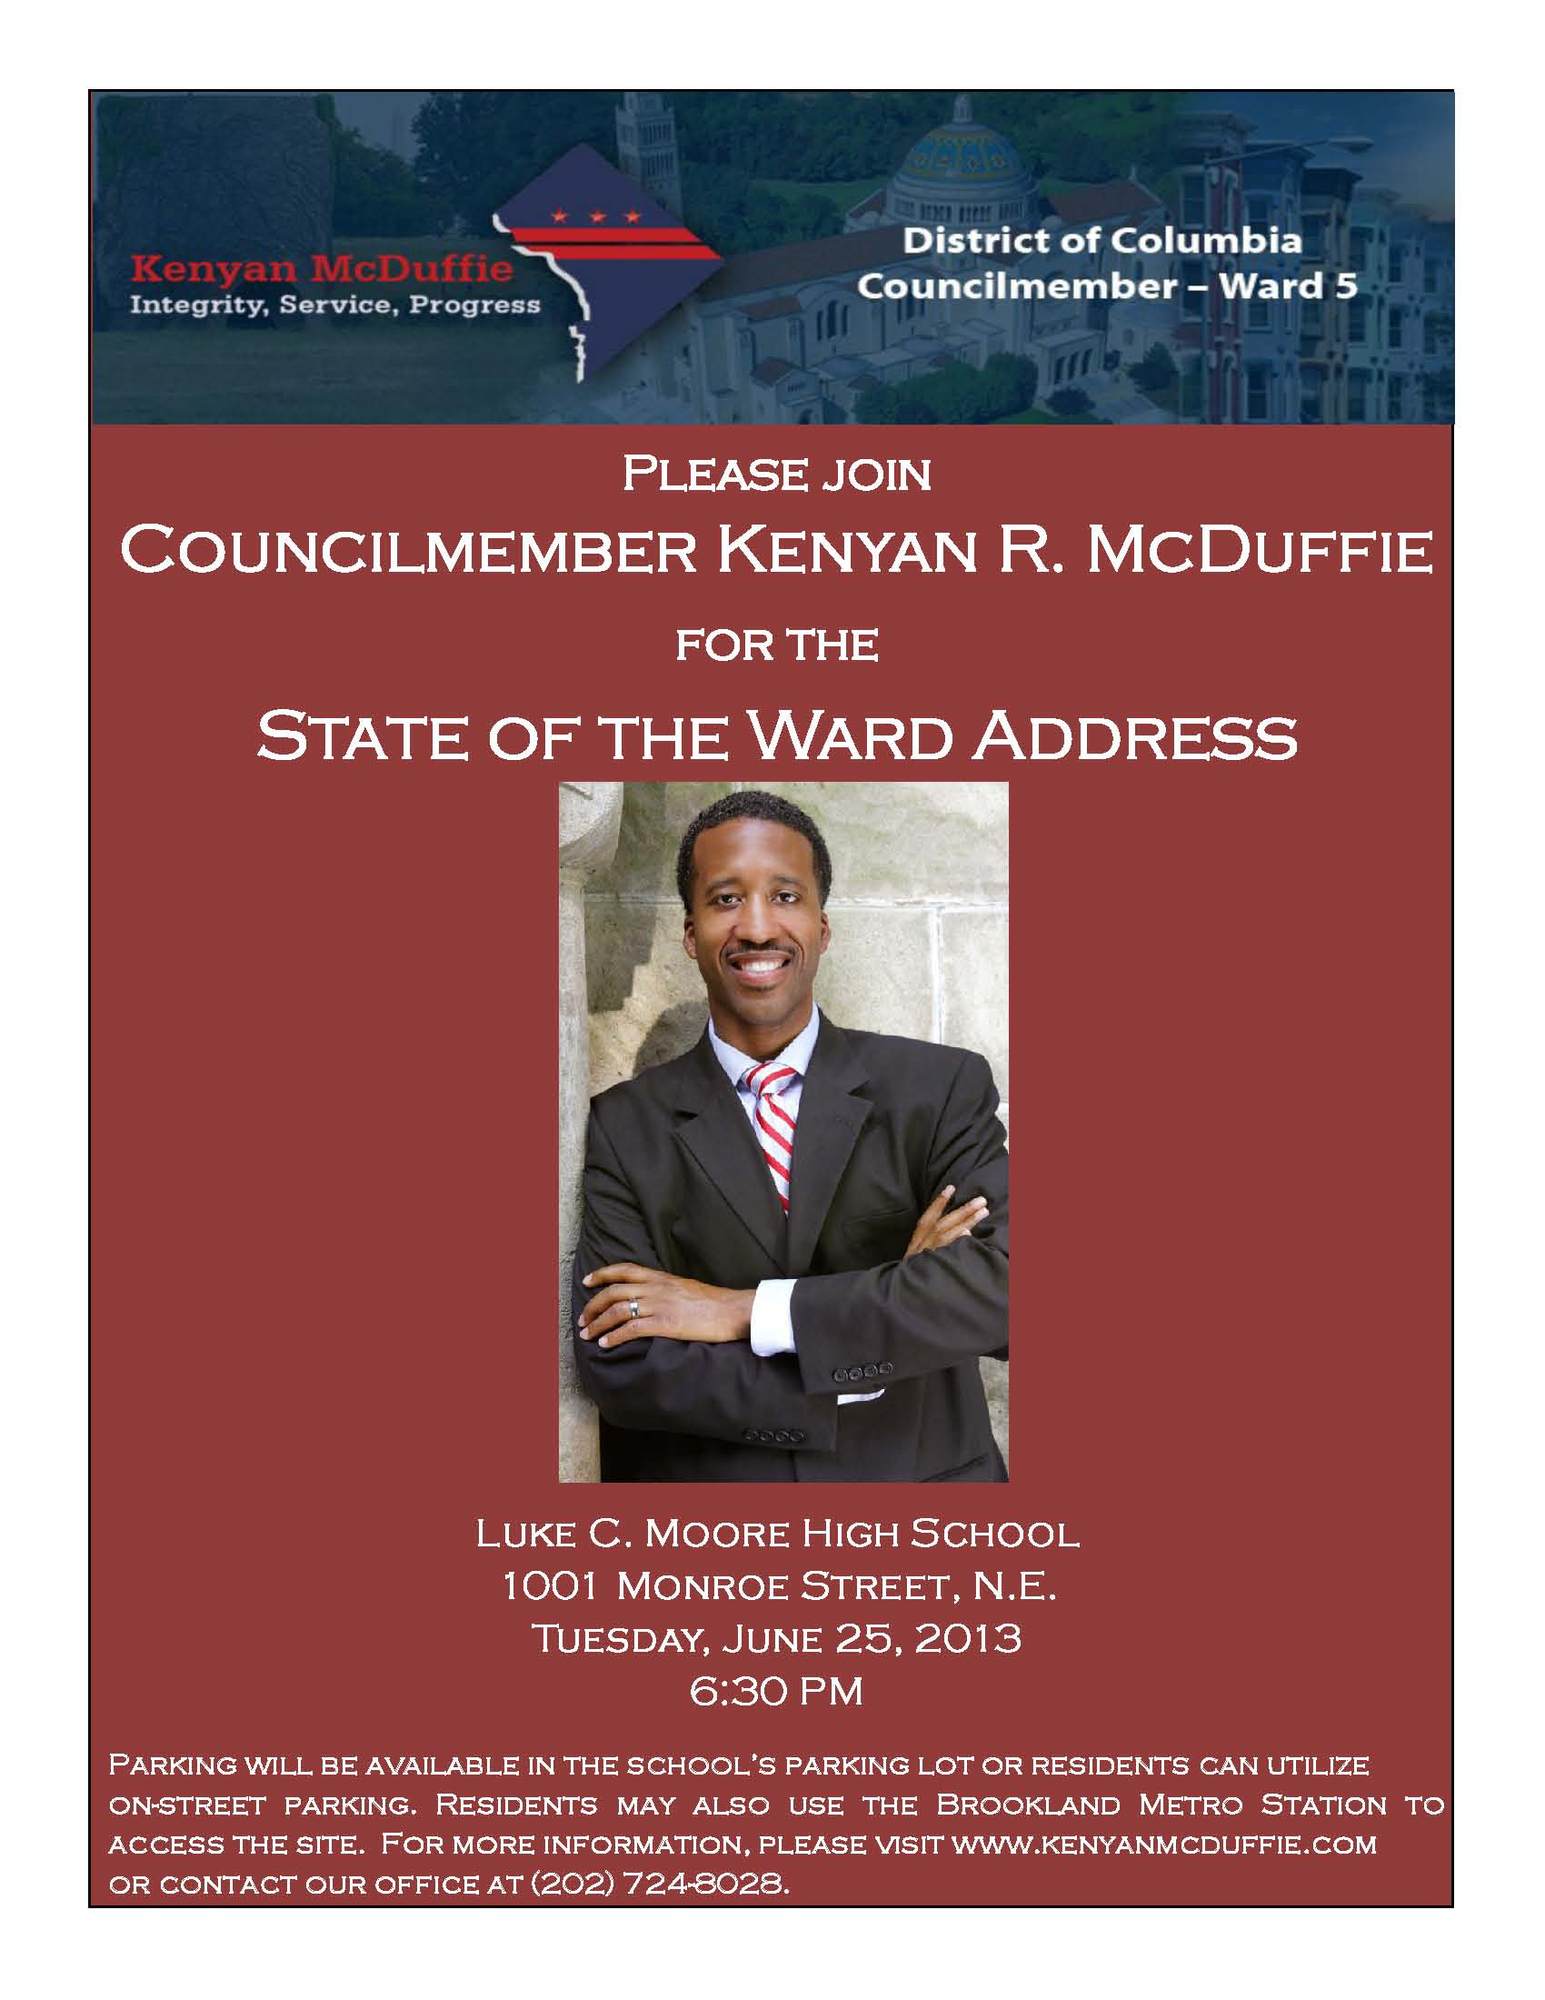 Councilmember McDuffie Invites Residents to His State of the Ward Address